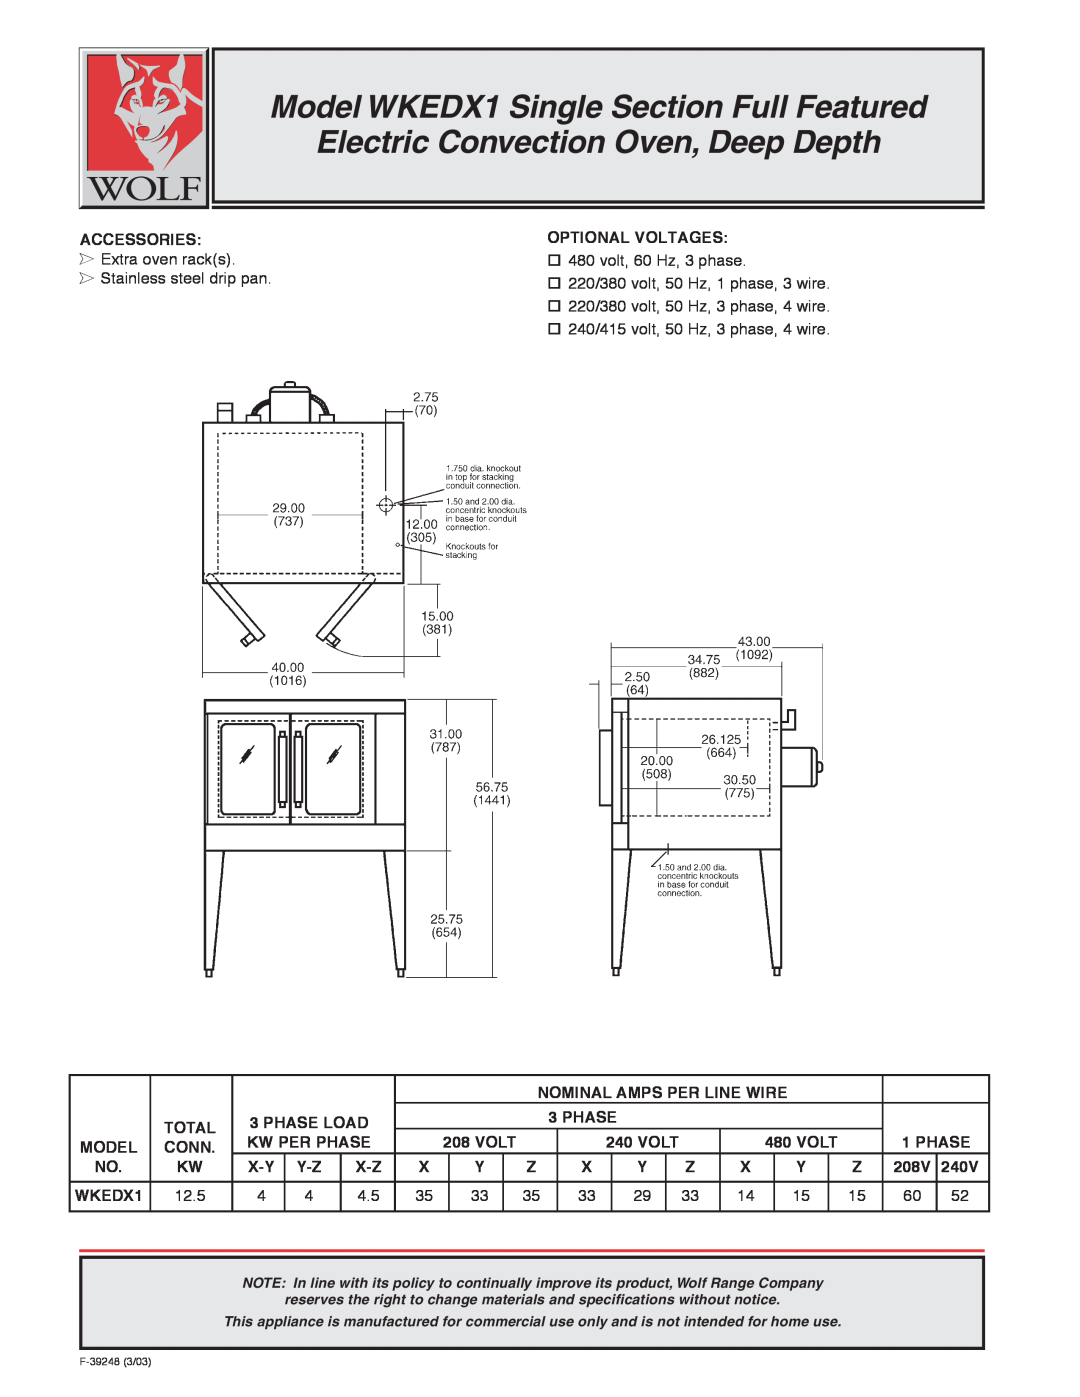 Wolf warranty Model WKEDX1 Single Section Full Featured, Electric Convection Oven, Deep Depth 